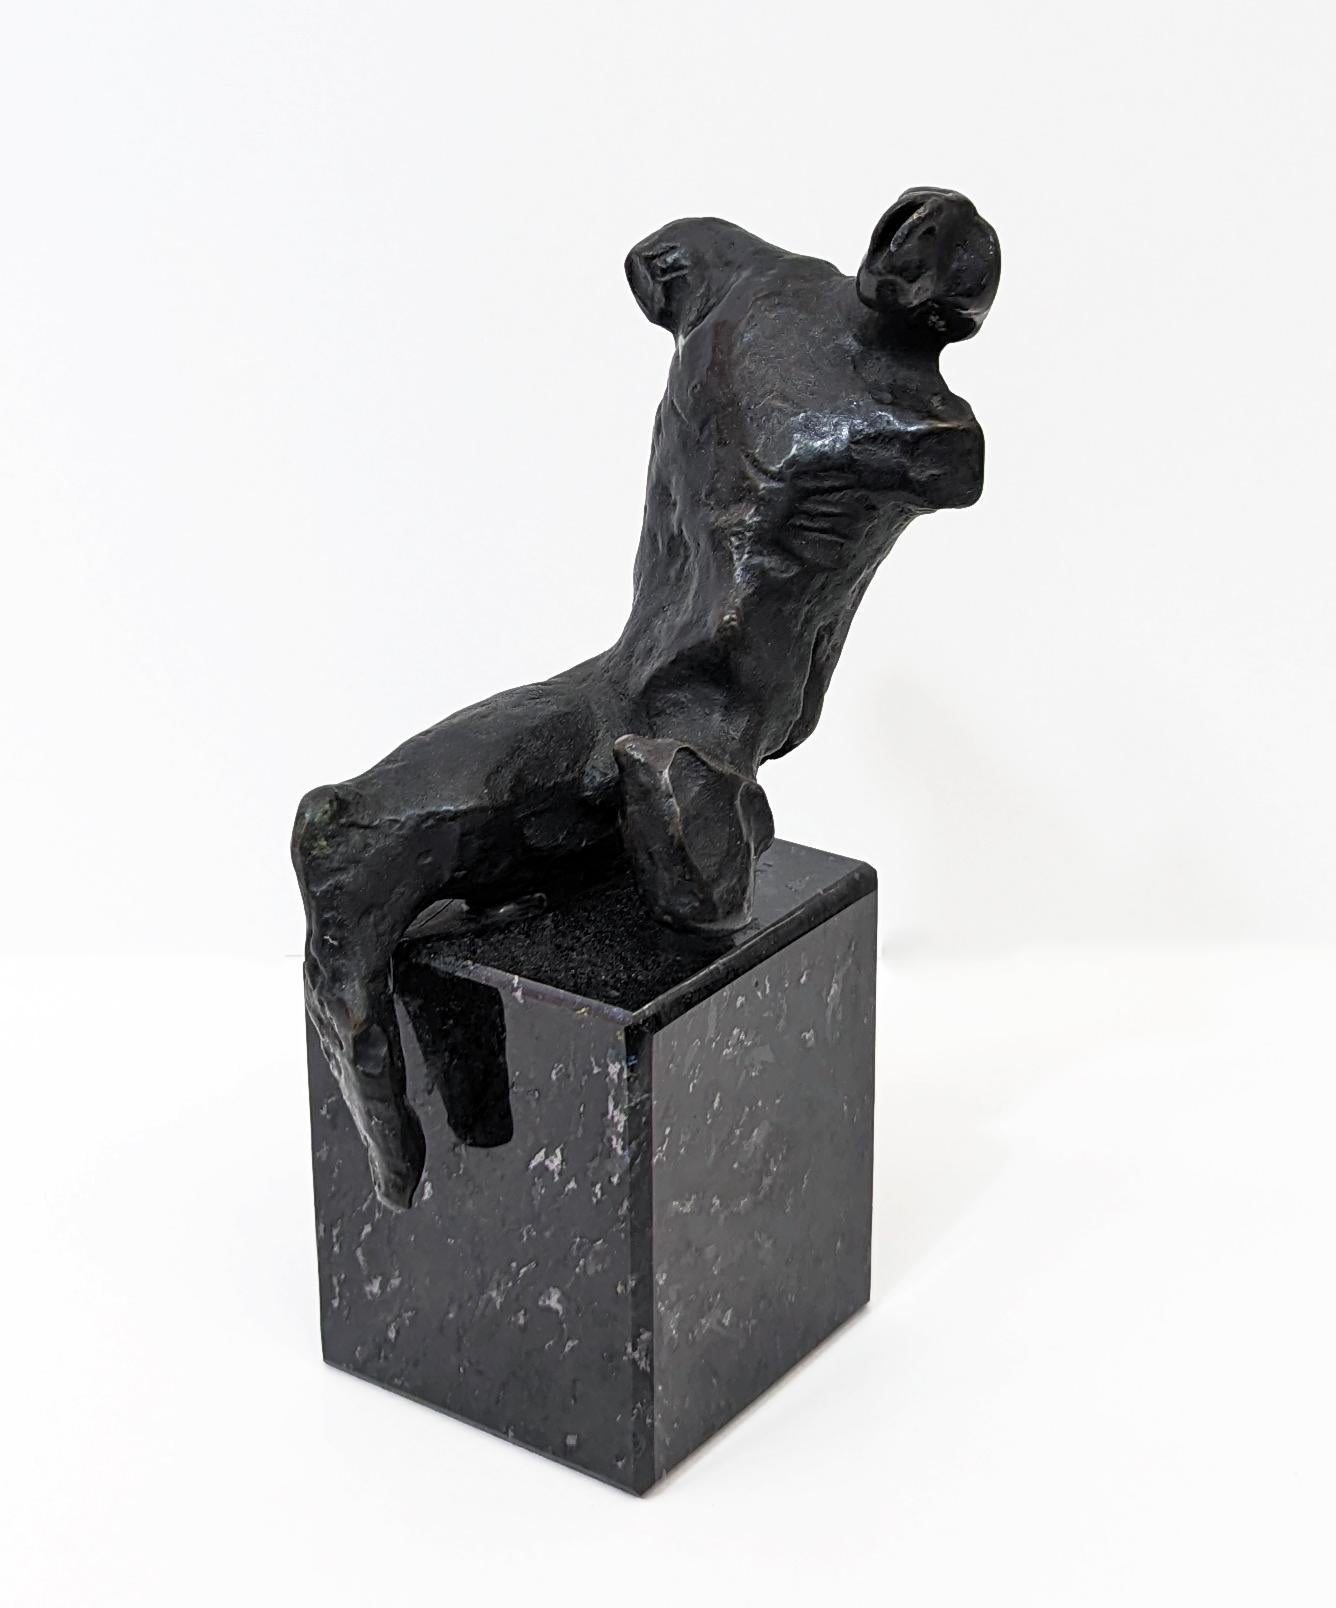 MAQUETTE FOR WARRIOR WITHOUT SHIELD - Sculpture by Henry Moore